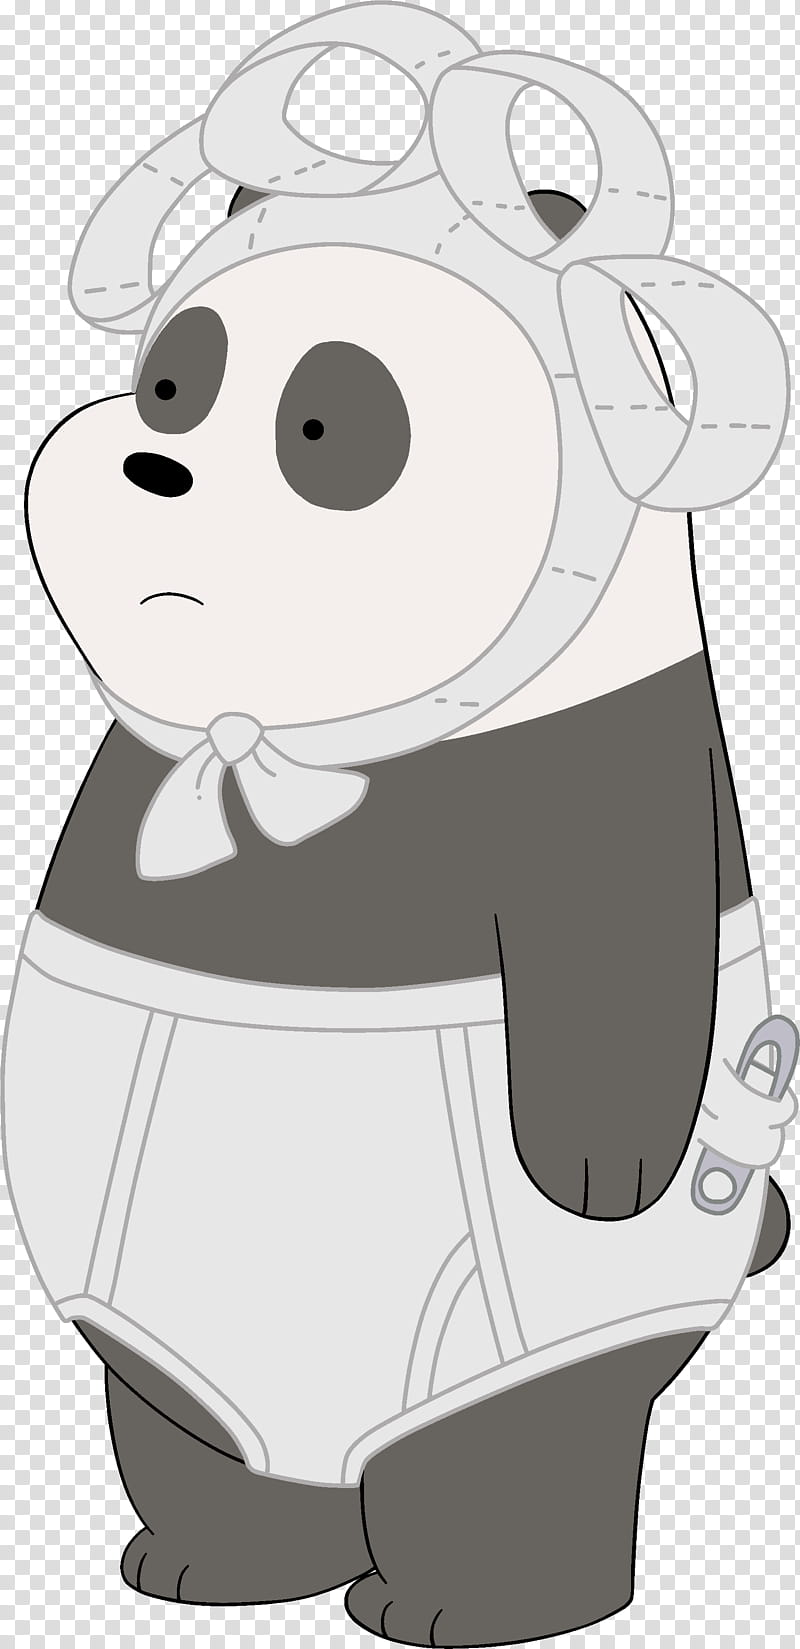 We Bare Bears, Giant Panda, Ice Bear, Grizzly, Polar Bear, Cuteness, Grizzly Bear, Cartoon Network transparent background PNG clipart